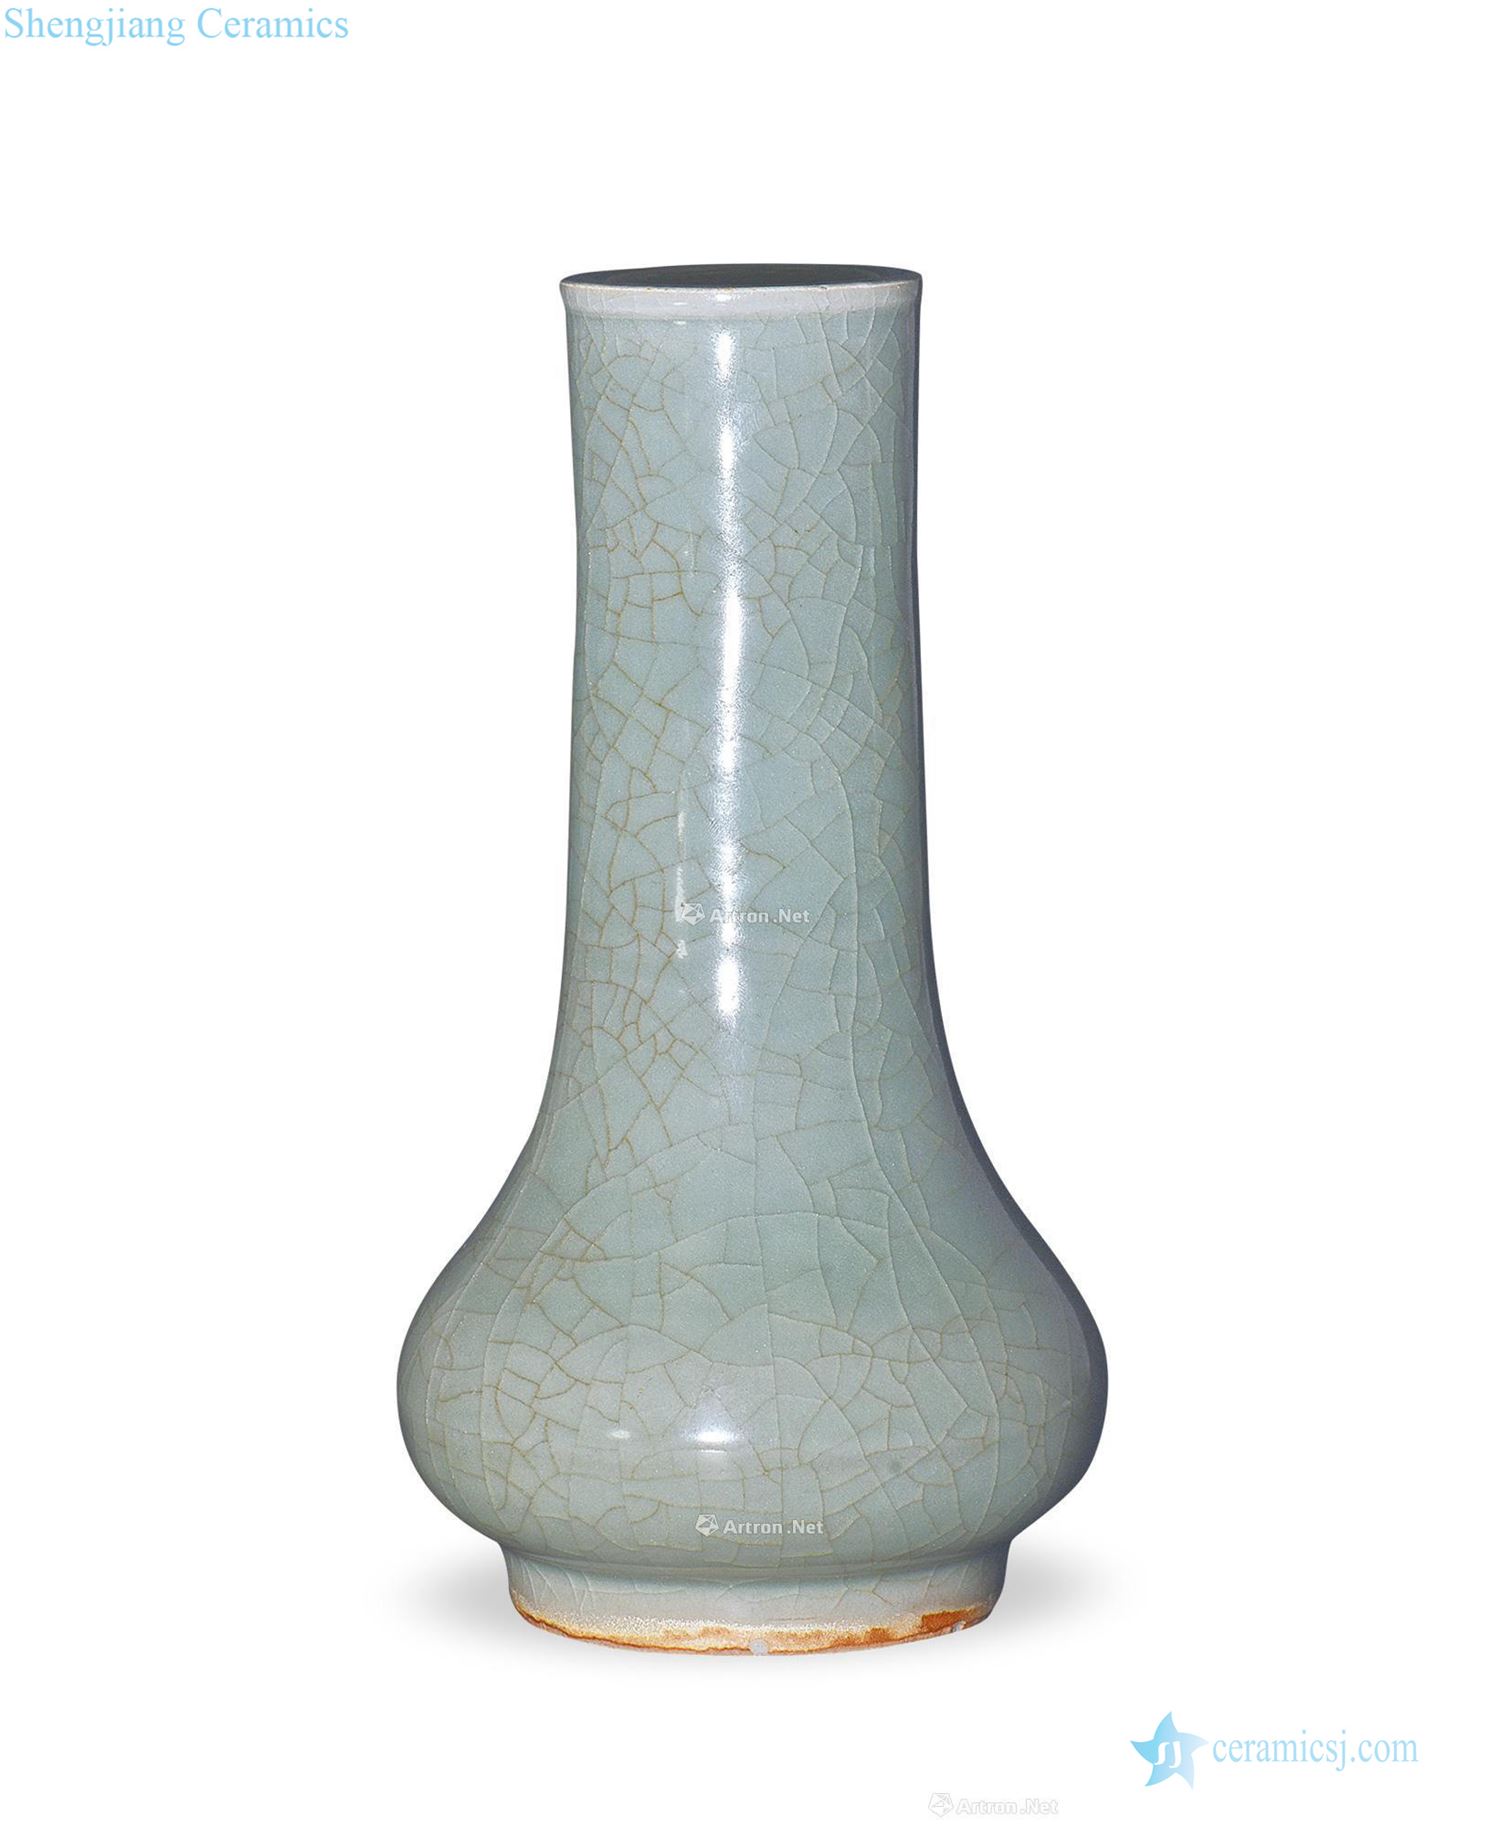 Northern song dynasty kiln the flask